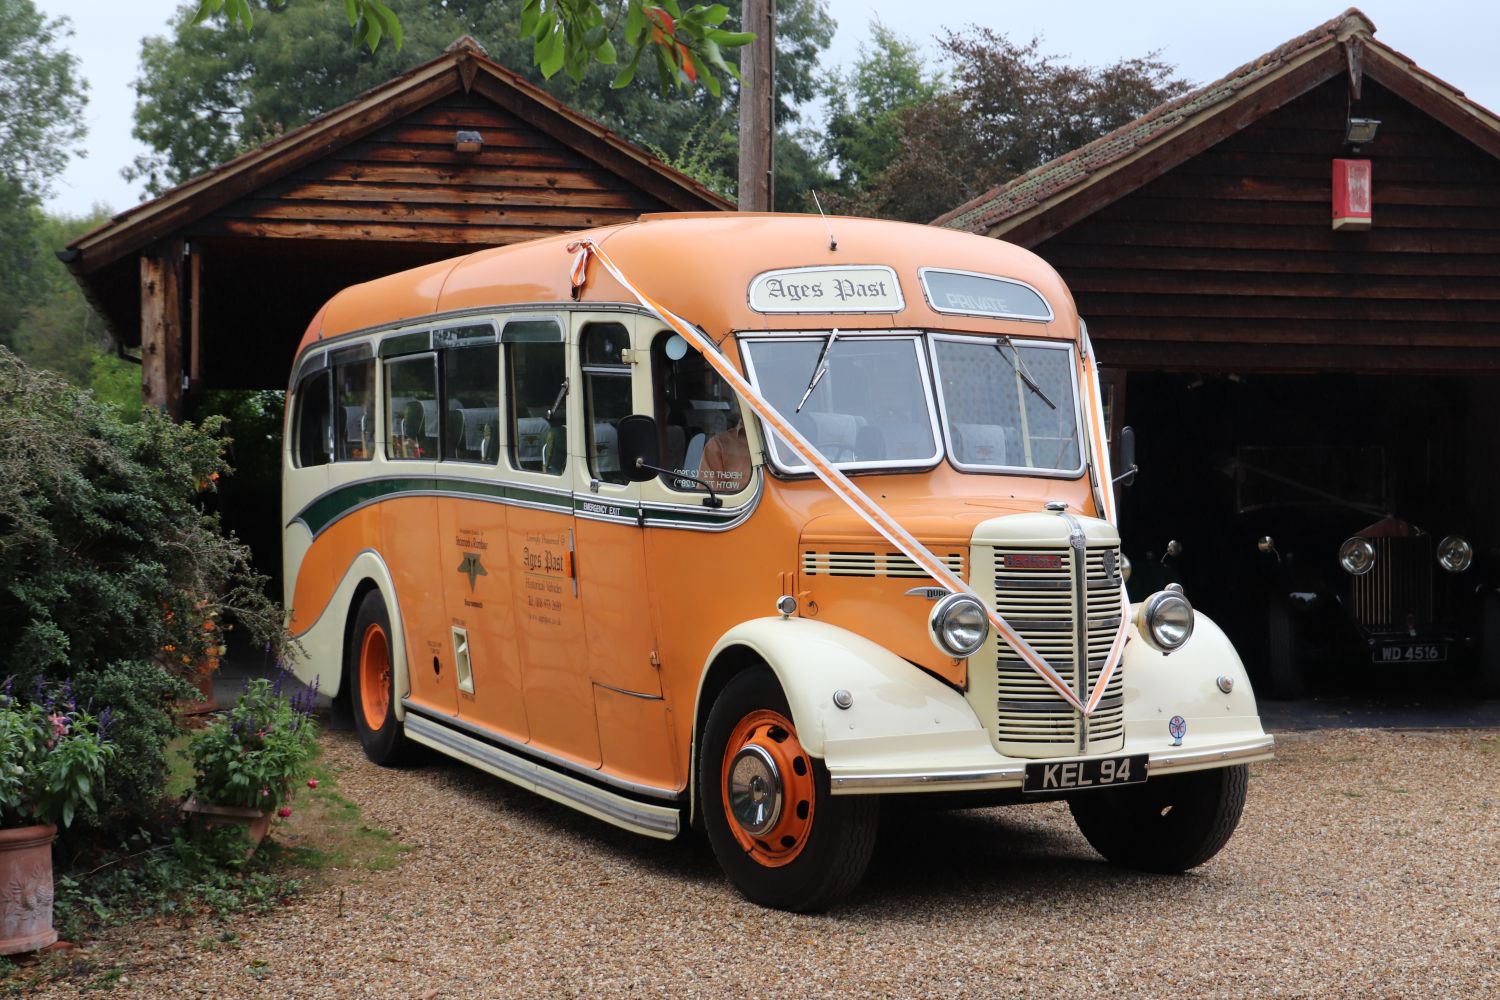 OB3 (as Mark refers to it) arrived in May 2015. It had been new to Shamrock & Rambler in March 1950 but had recently had spells in Ireland and Wales before Mark acquired it. It is one of three Duple Vista bodied Bedford OBs owned